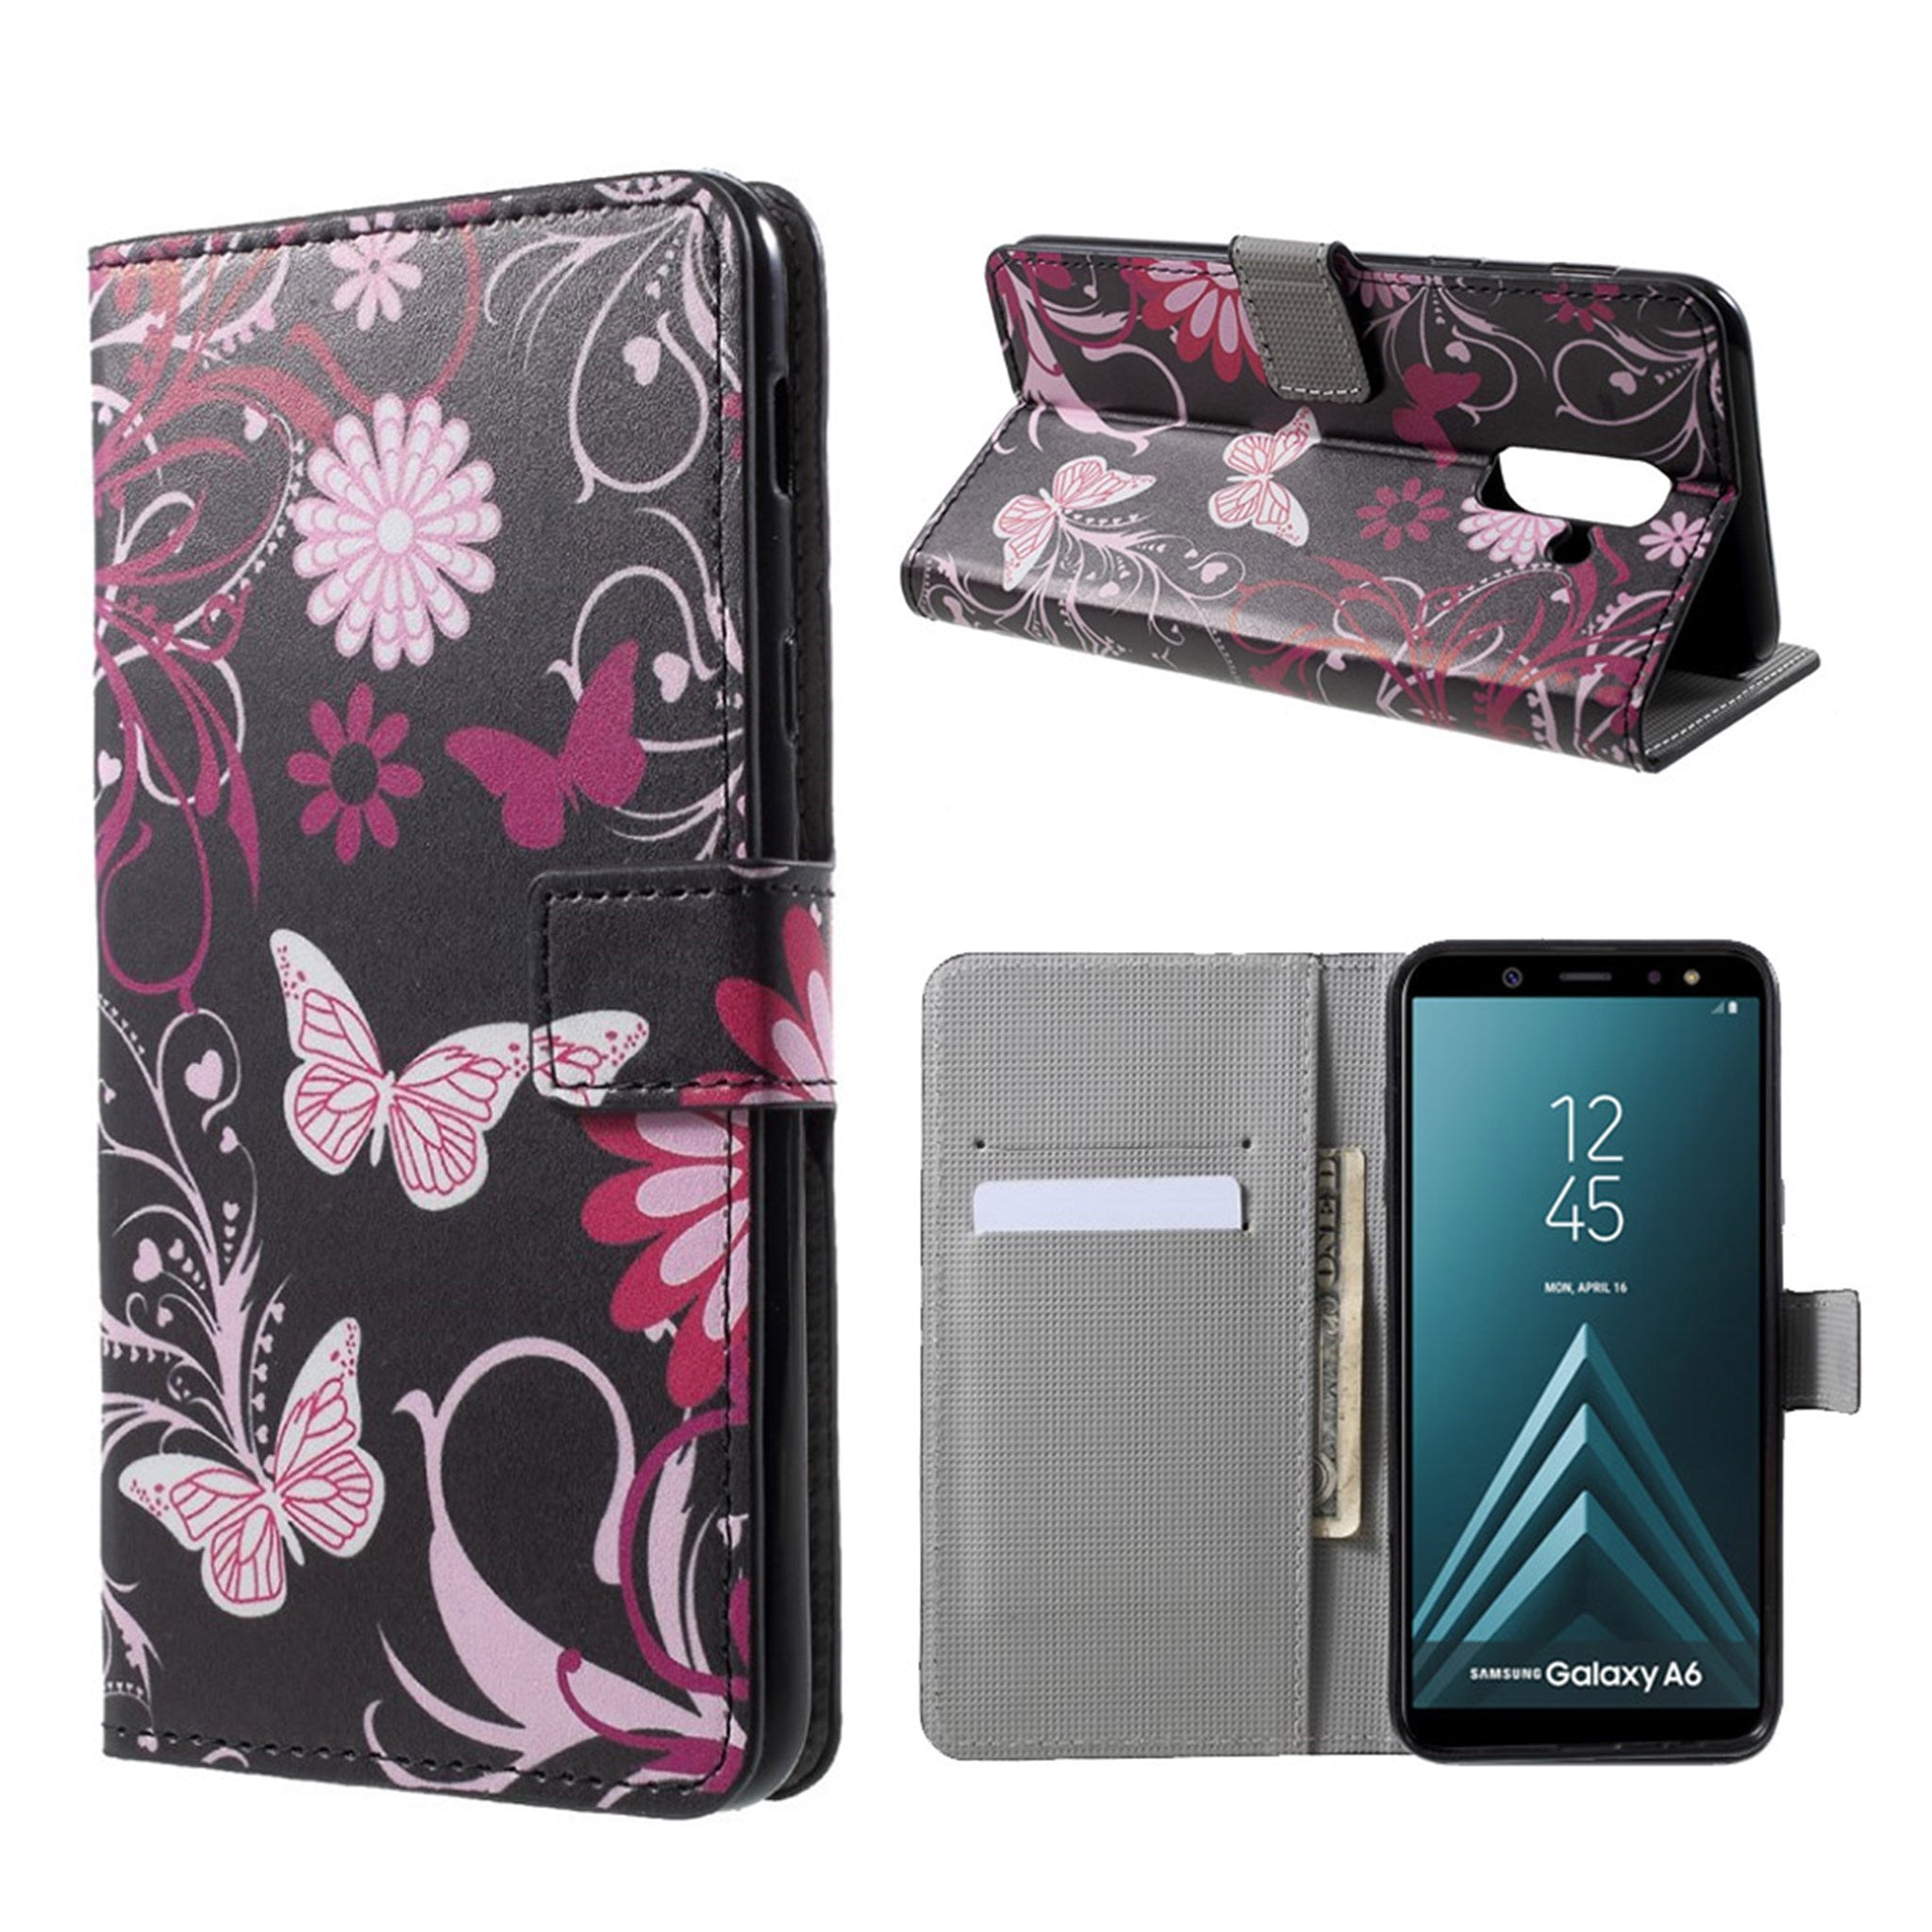 Samsung Galaxy A6 pattern printing cross texture leather flip case - Butterfly Flower